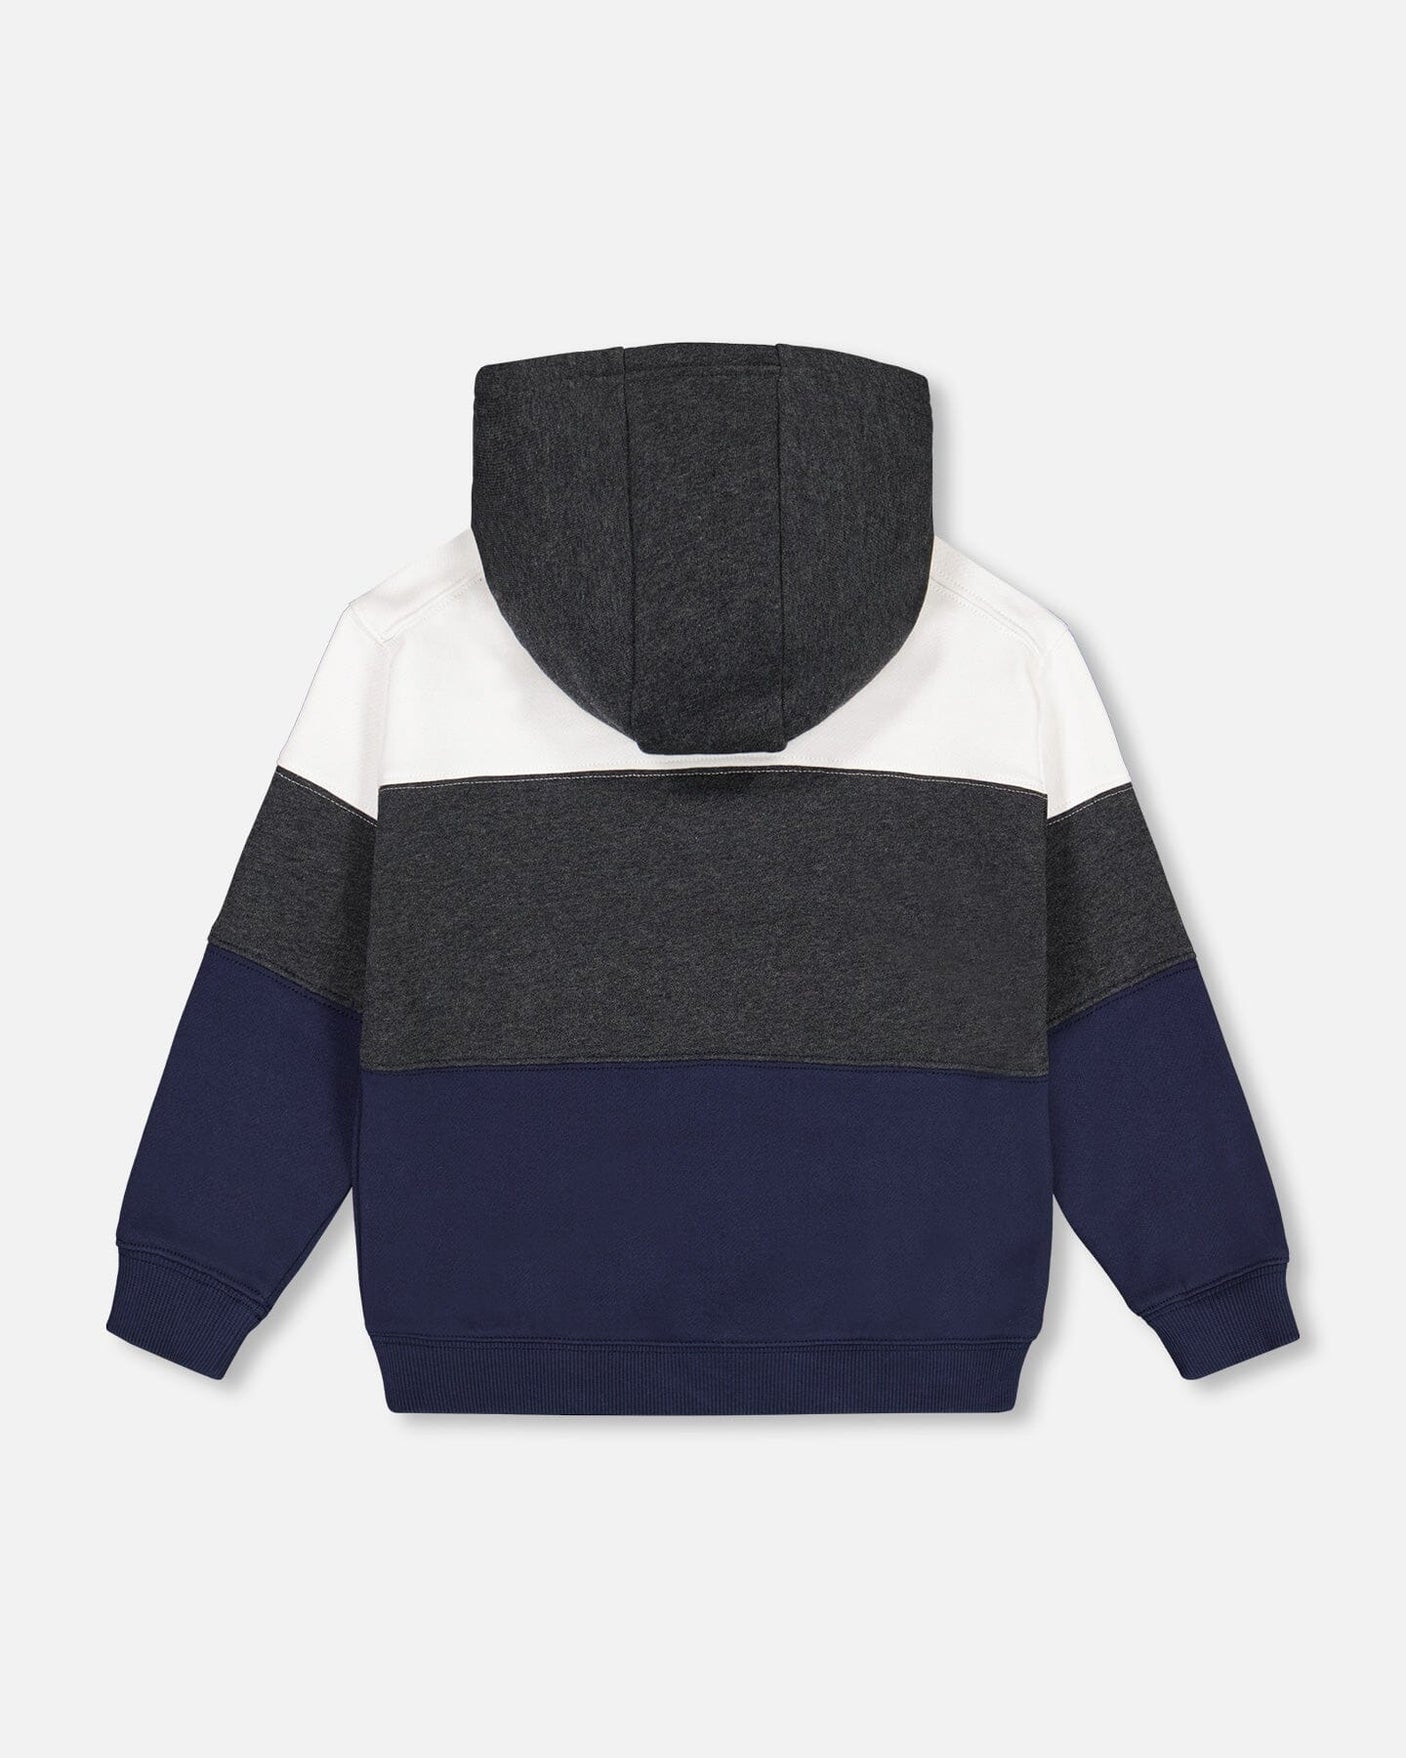 Hoodie With Zipper Pocket Grey, Navy And Off White Color Block-2